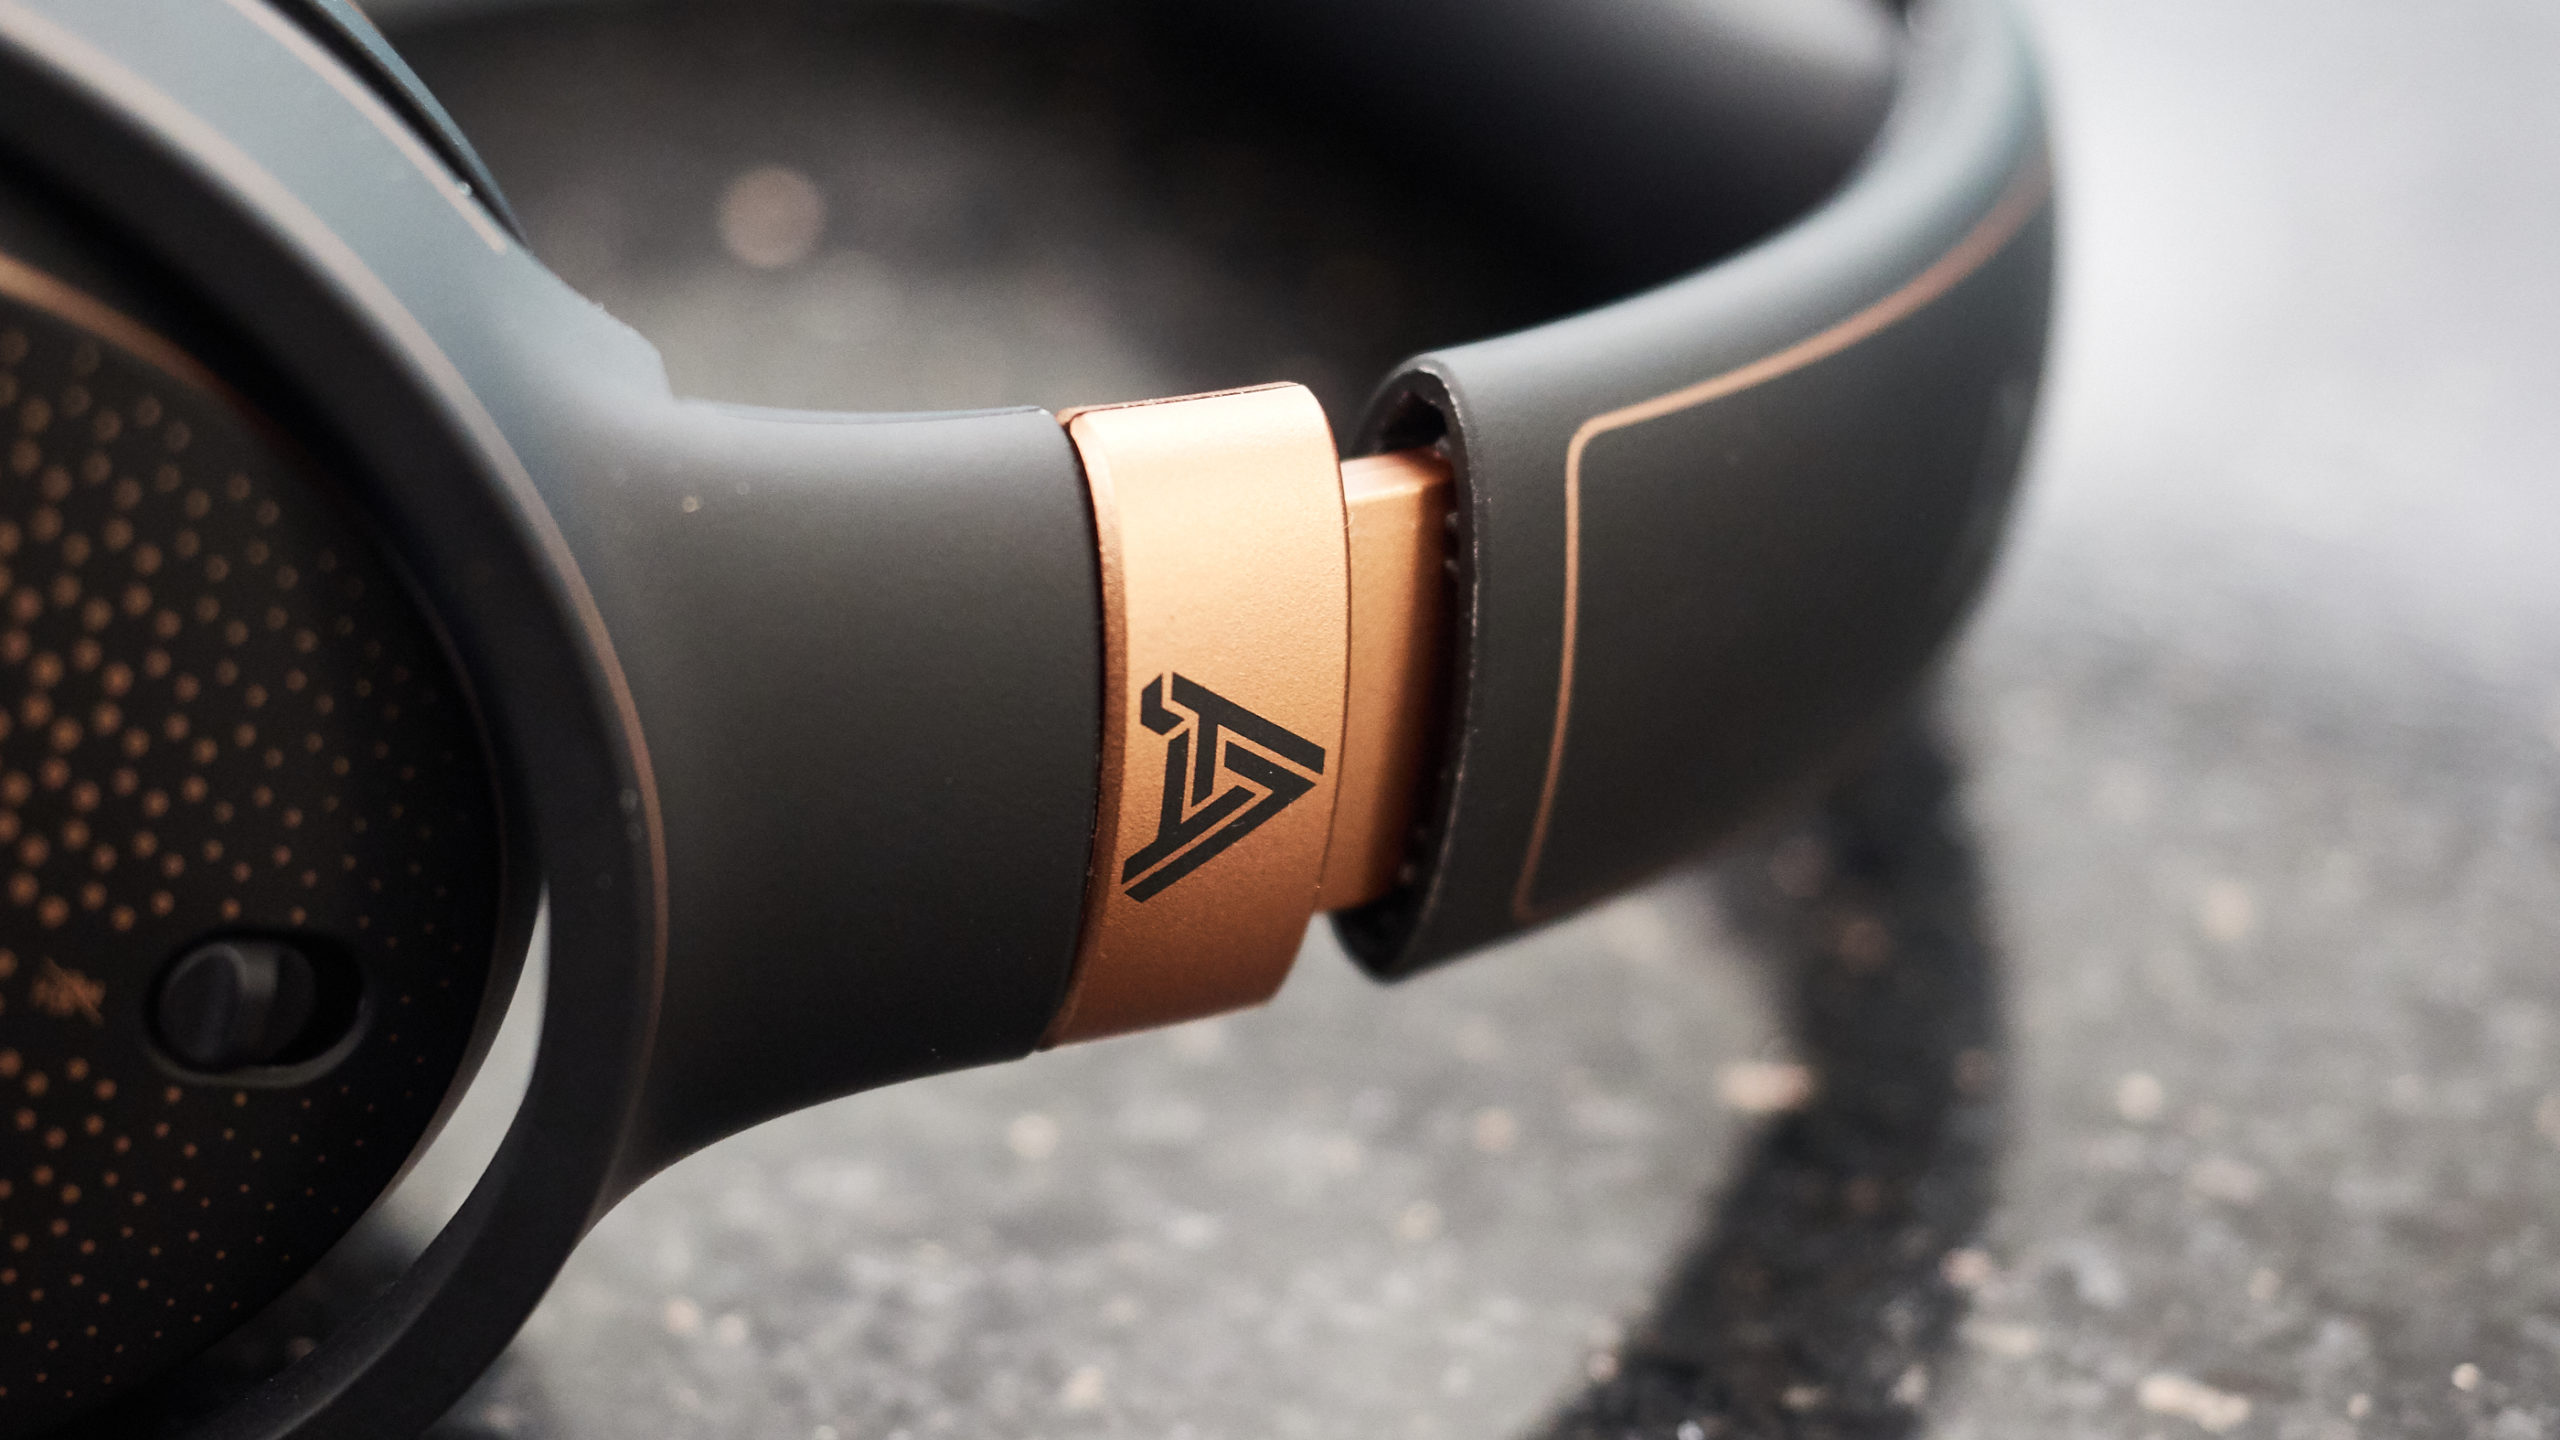 Audeze Wants To Change How You Think About Gaming Headphones And 3D Audio